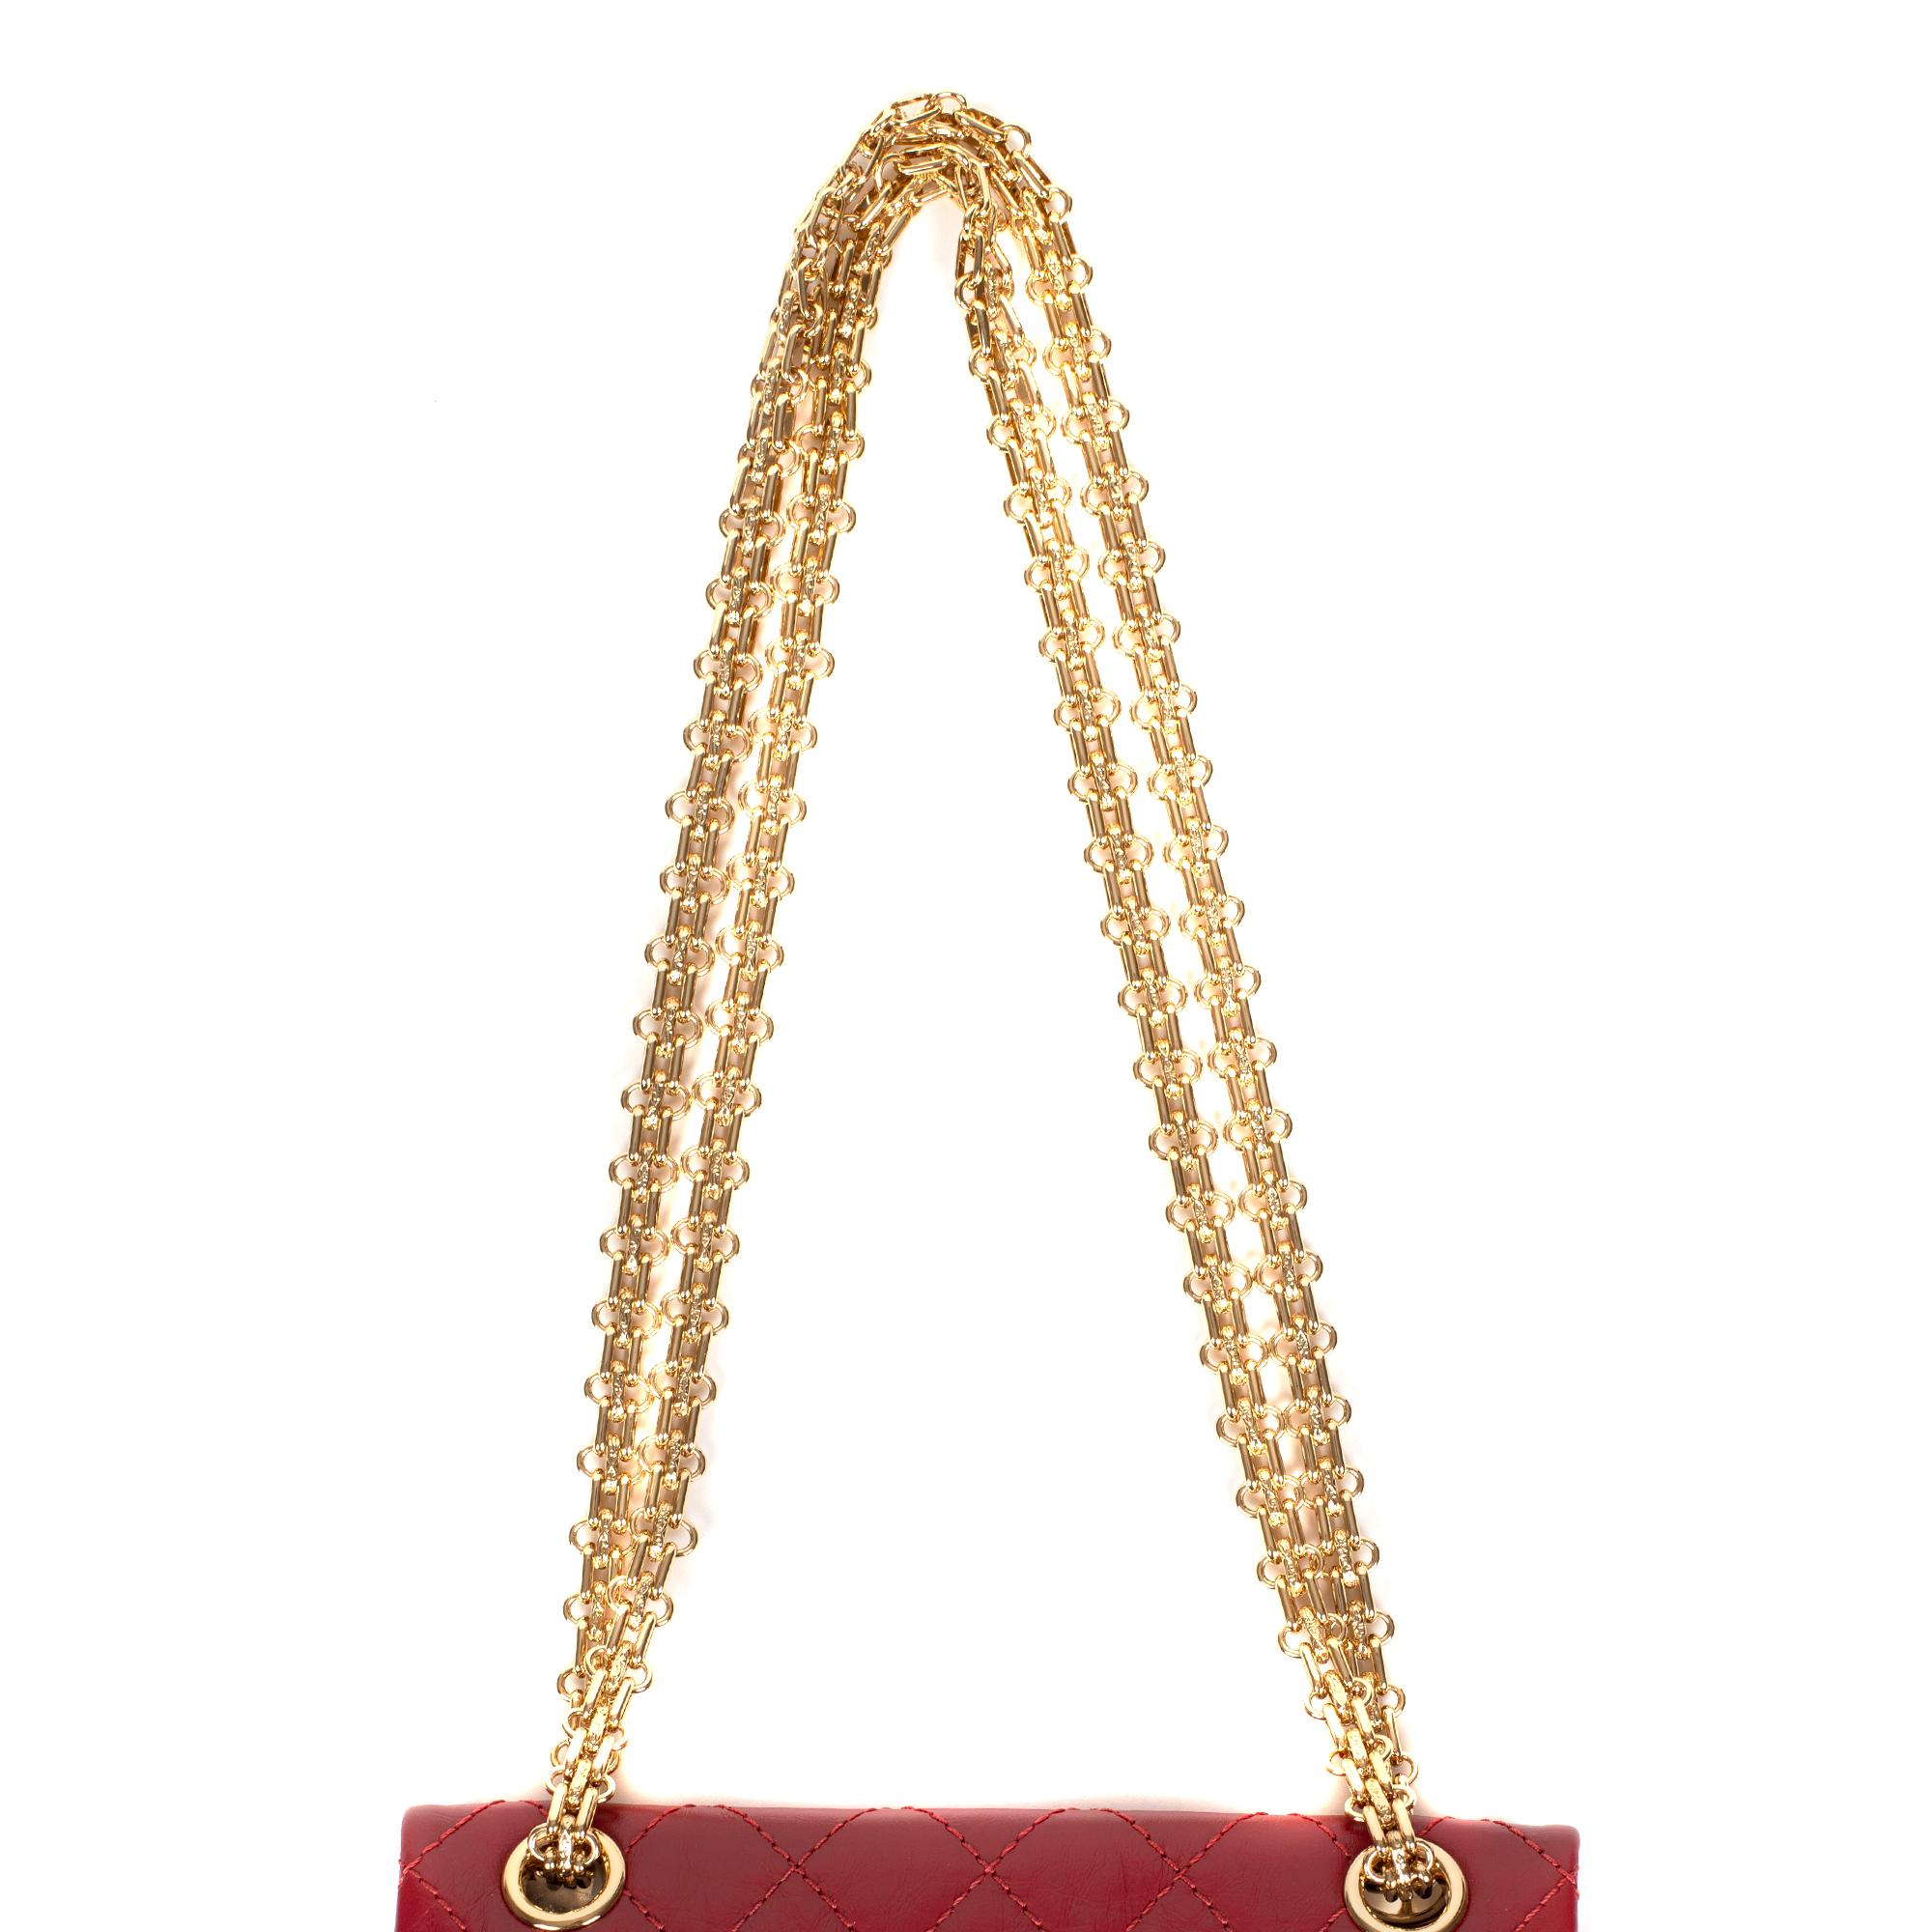 Rare Mini Chanel 2.55 Reissue handbag in red quilted leather, gold hardware 5